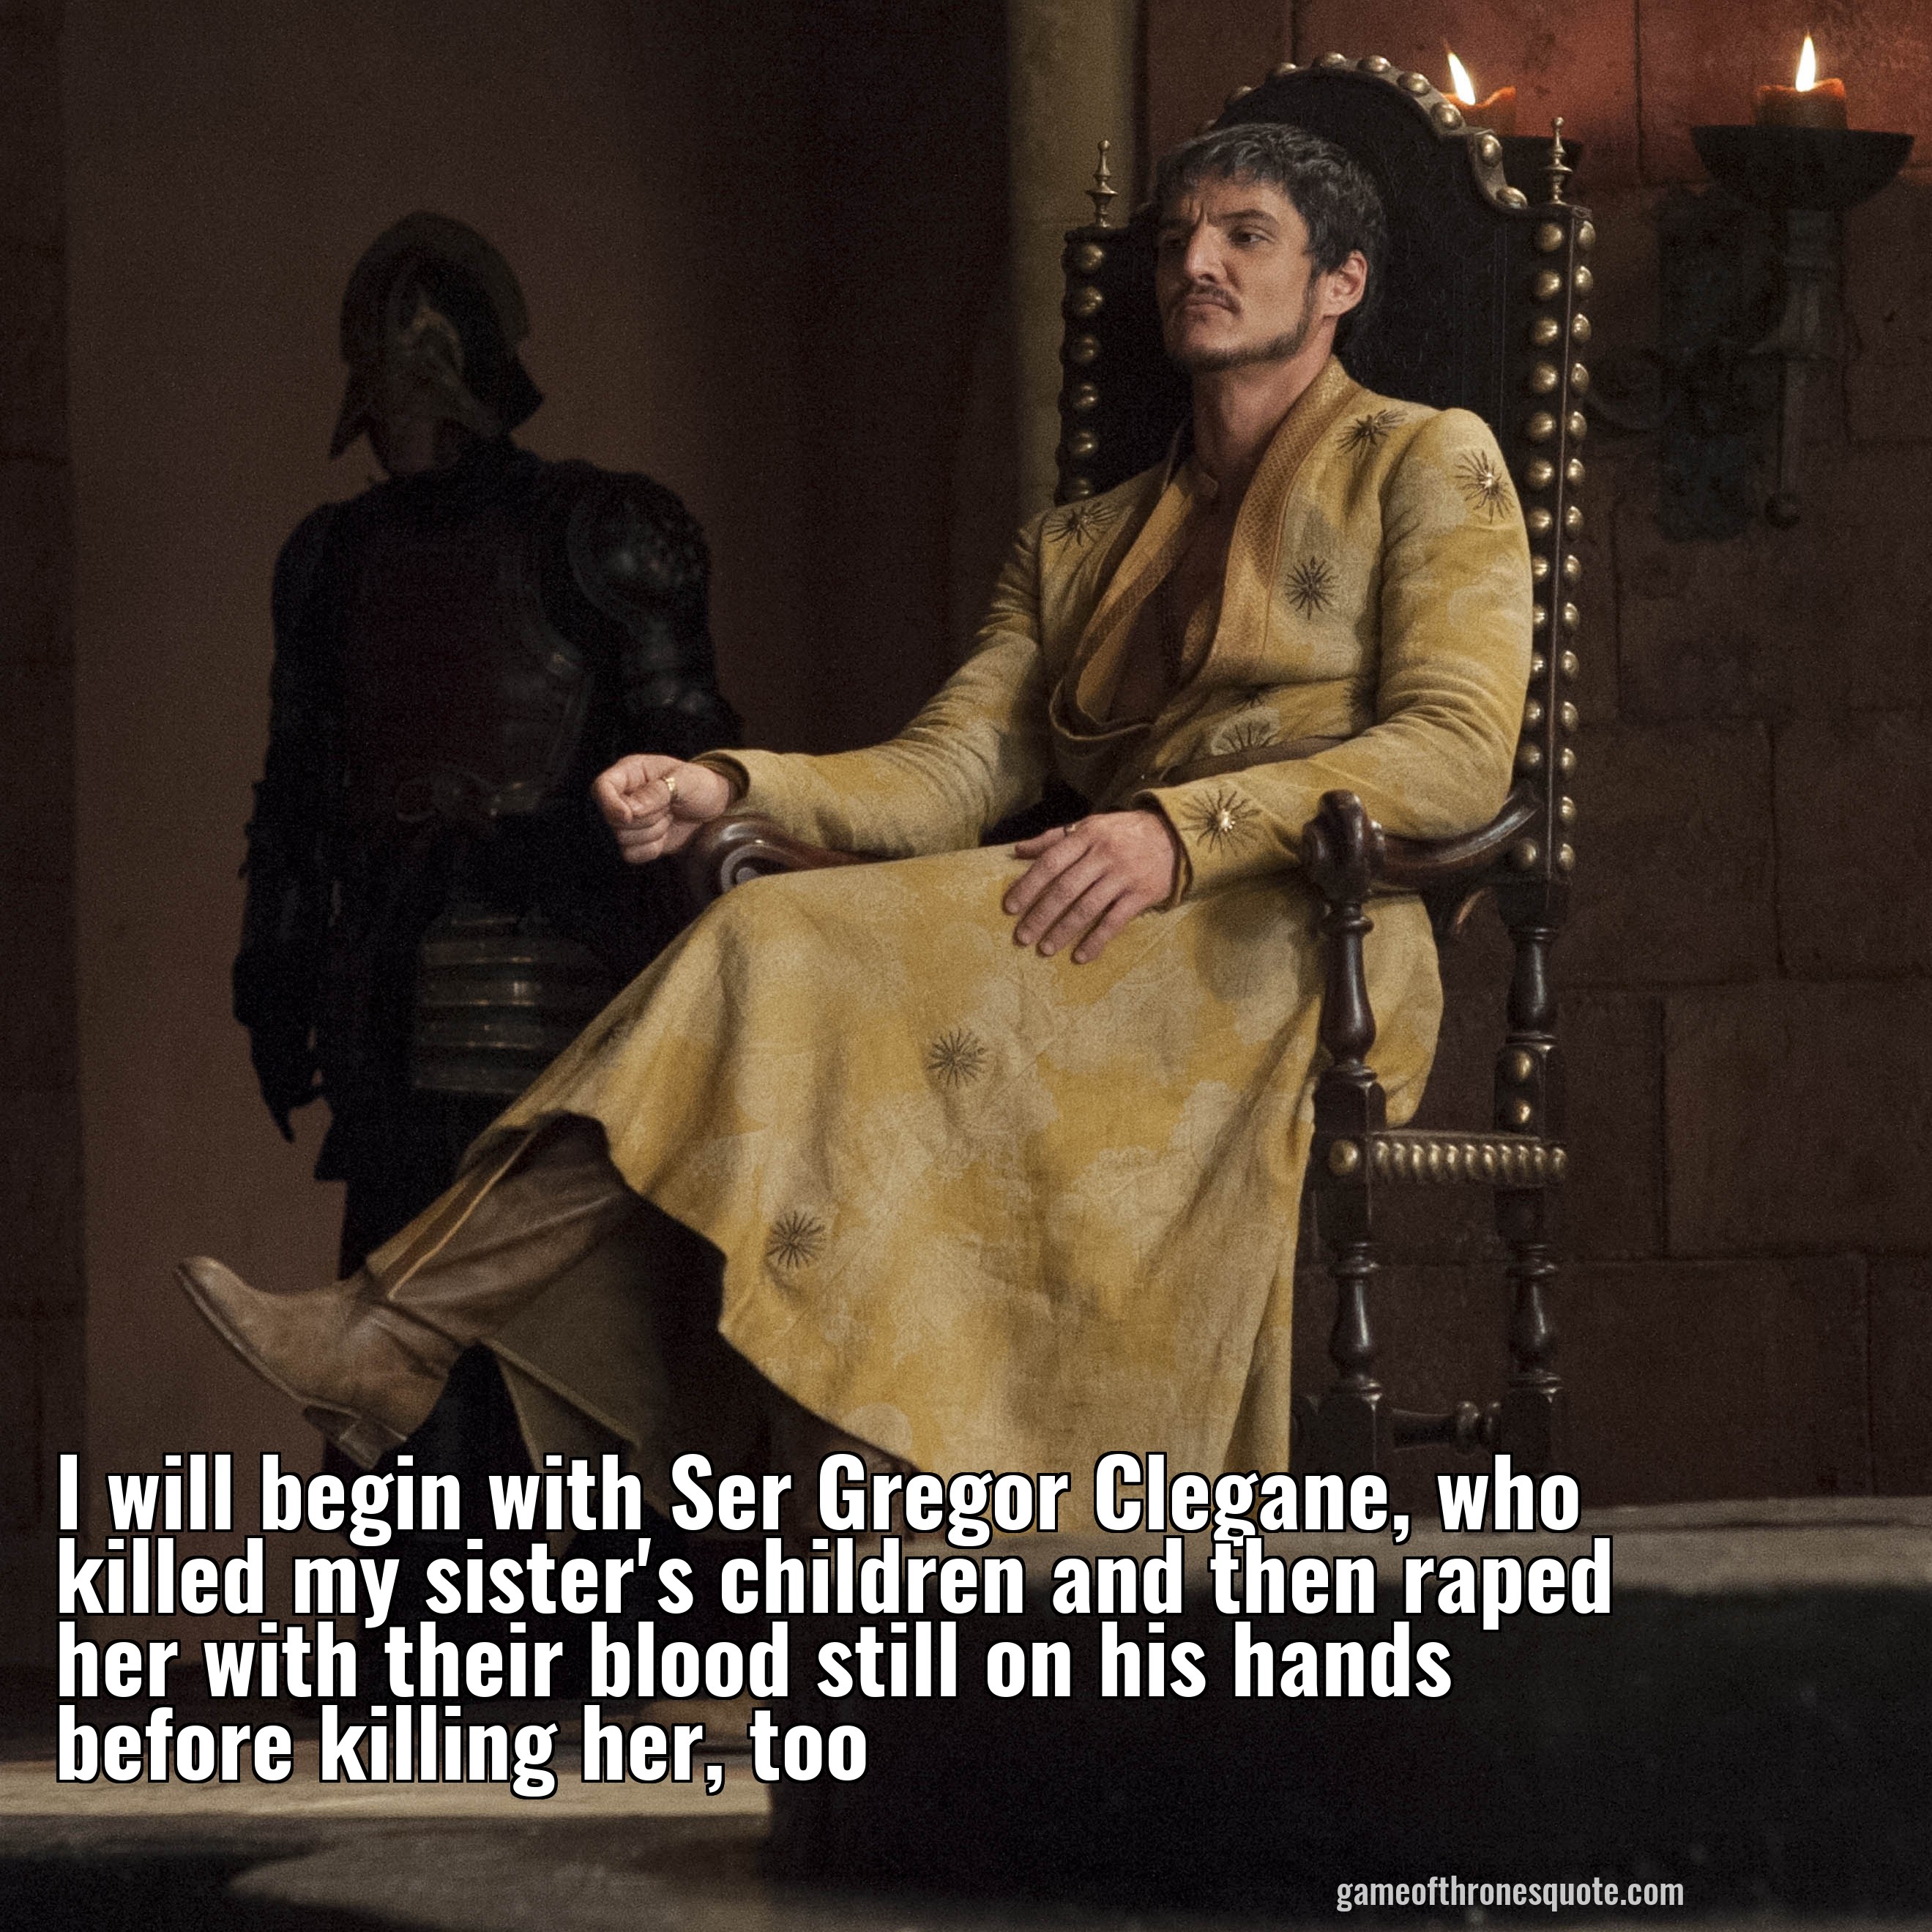 I will begin with Ser Gregor Clegane, who killed my sister's children and then killed her with their blood still on his hands before killing her, too